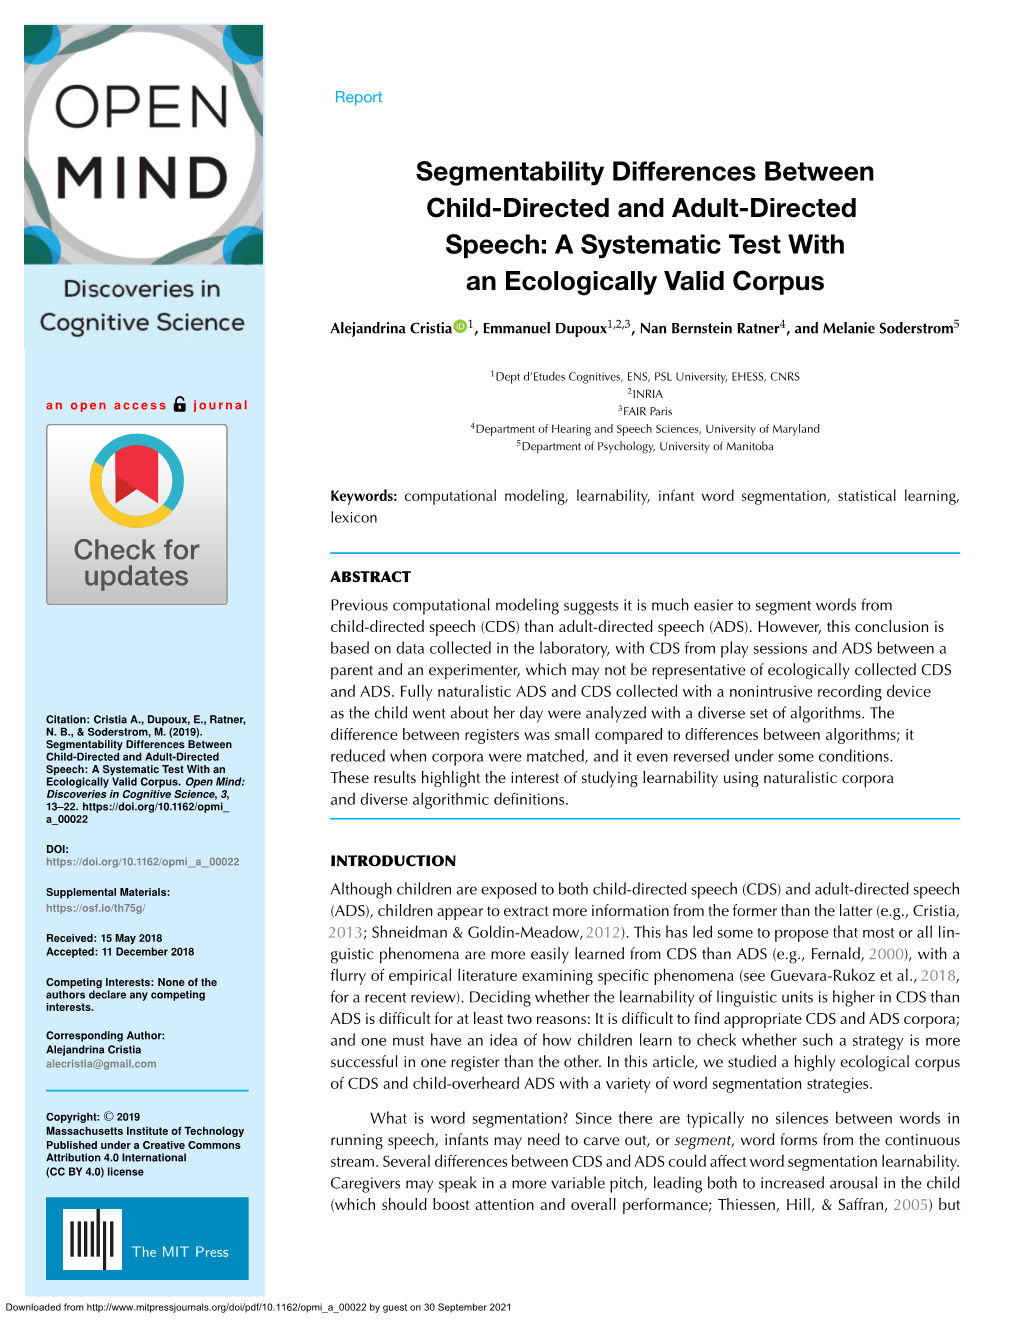 Segmentability Differences Between Child-Directed and Adult-Directed Speech: a Systematic Test with an Ecologically Valid Corpus